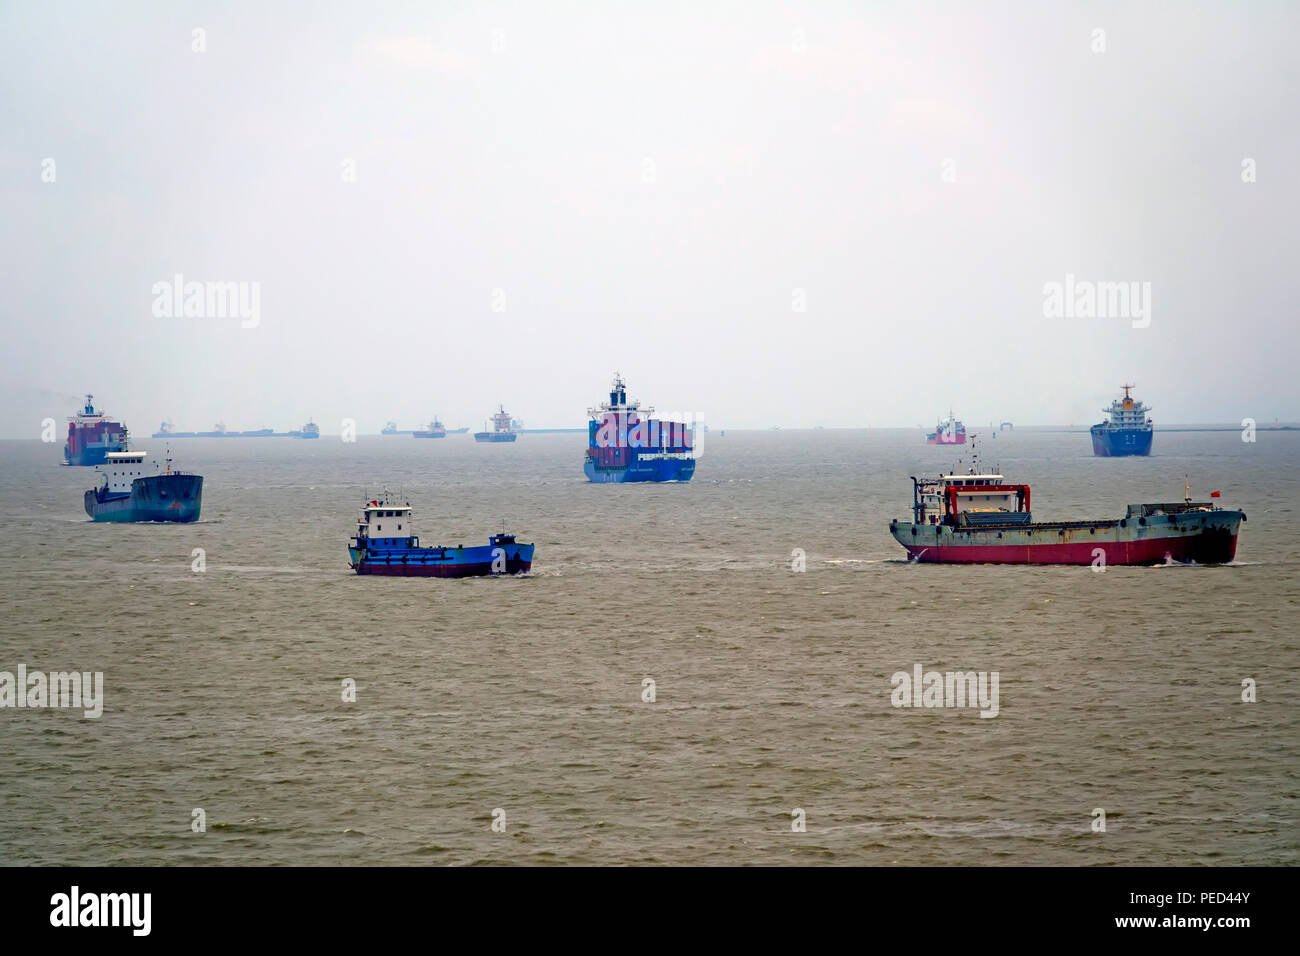 Container ships and fishing boats in Shanghai China Asia East China Sea Yangtze River Delta Stock Photo